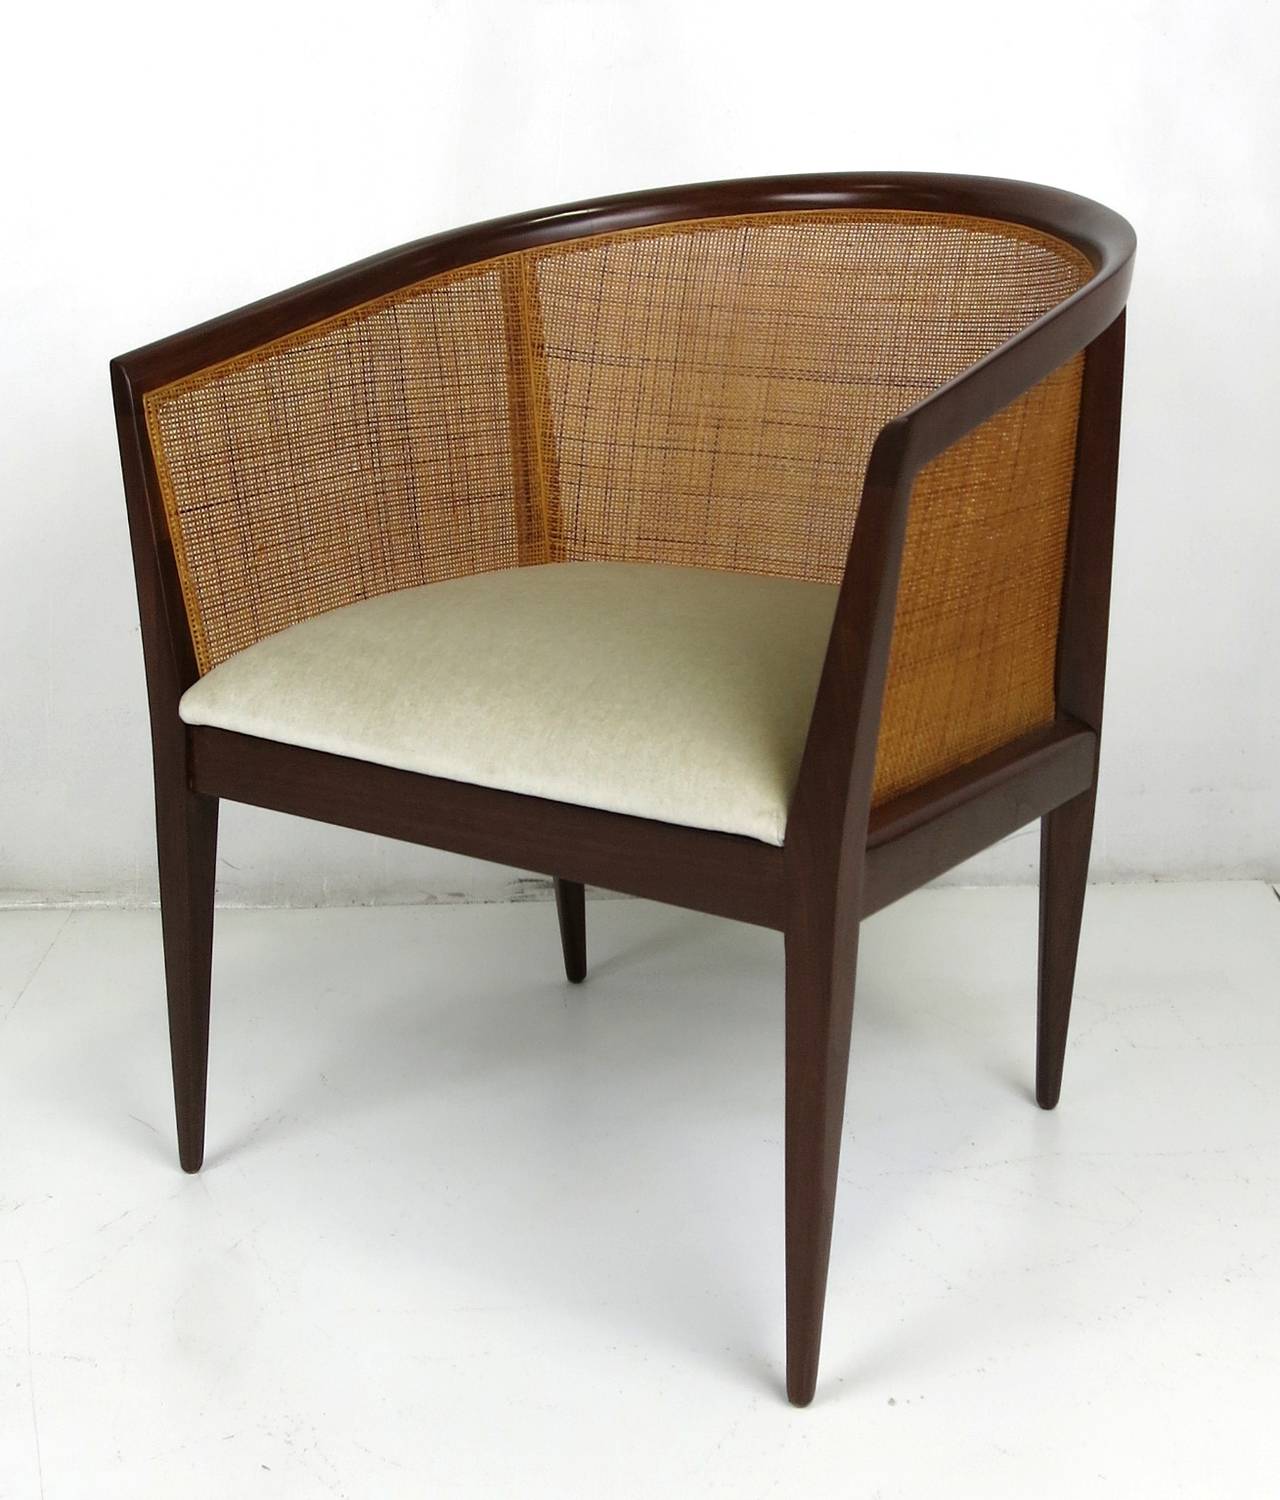 Superbly crafted caned back walnut lounge chair by Kipp Stewart for Directional. The chair has been meticulously restored to mint condition and reupholstered in luxurious heavyweight velvet.